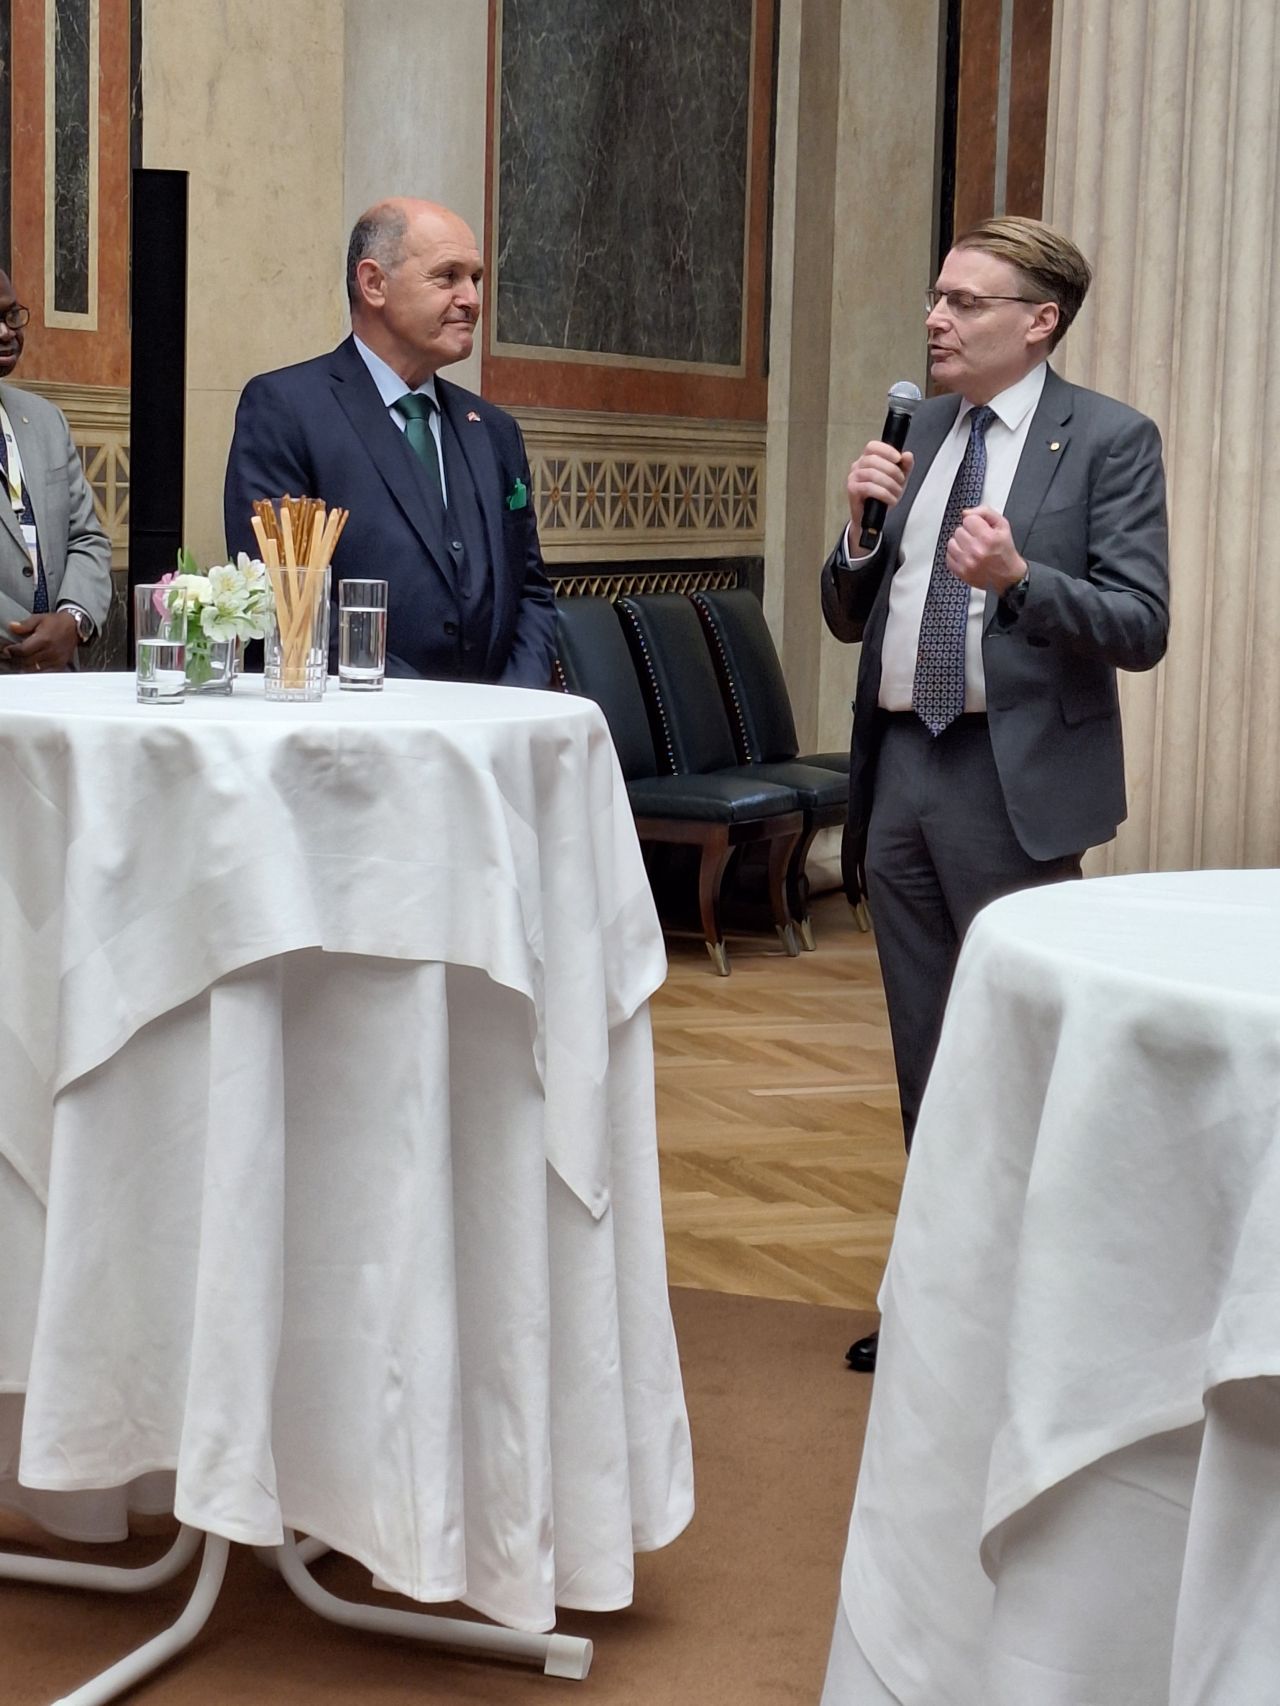 IOI President, Chris Field PSM, giving a speech in response to President of the Austrian National Council, His Excellency Mr Wolfgang Sobotka.